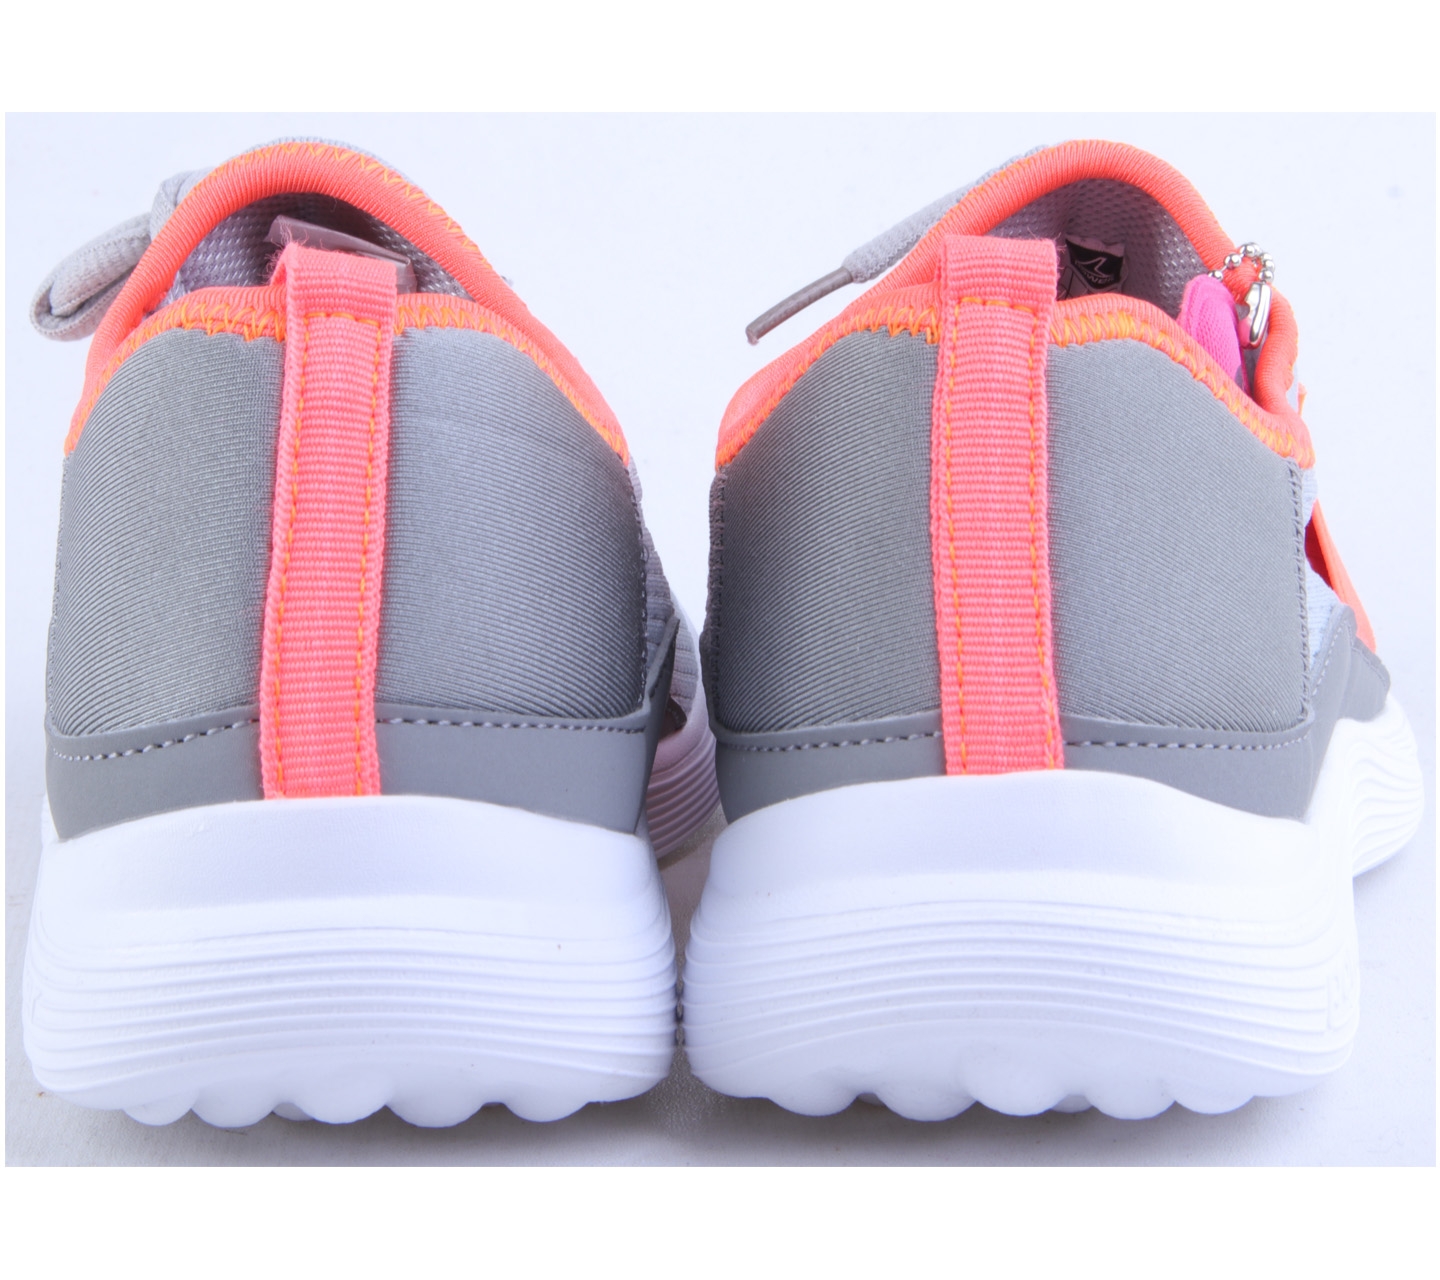 Power Grey And Pink Coral Glide Fog Sneakers